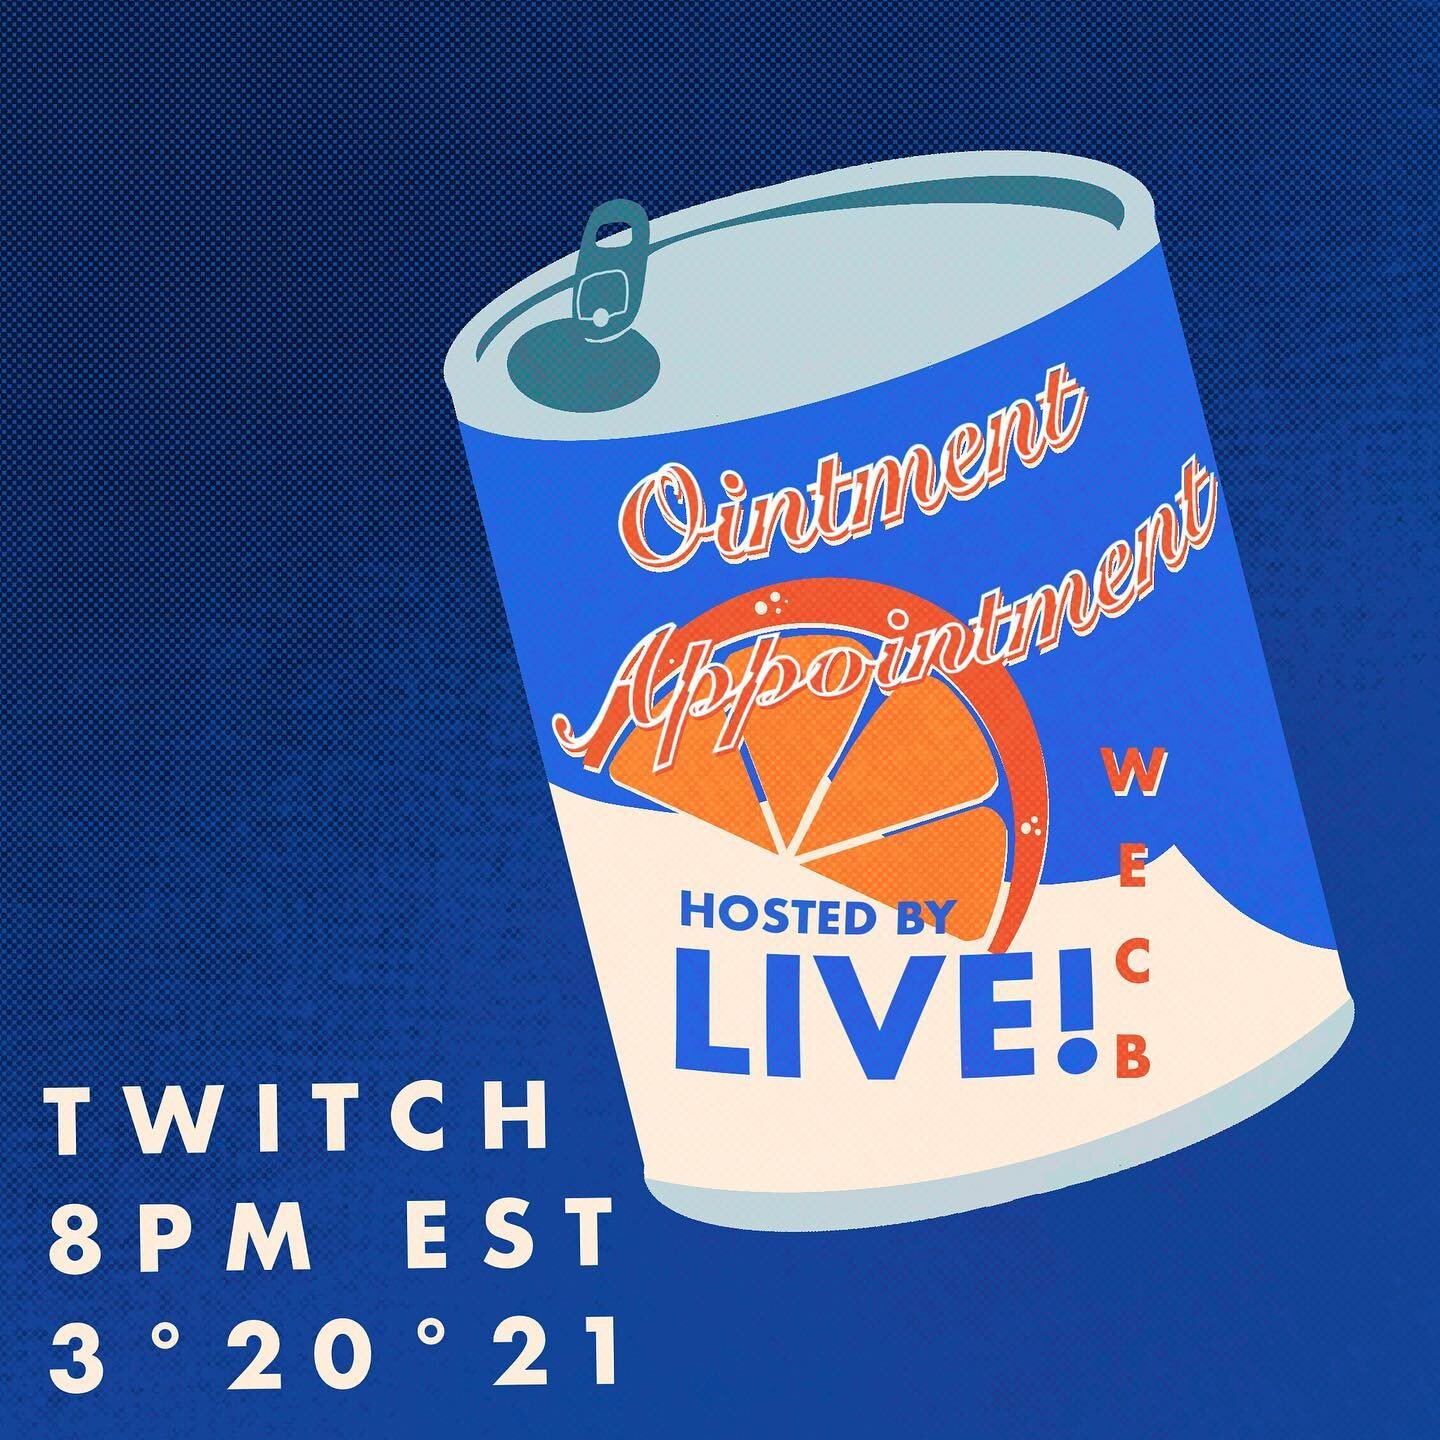 EDIT: SHOW IS ON 3/21 

Catch @ointmentappointment LIVE on WECB&rsquo;s Twitch at 8 PM on Sunday 3/21! 

Graphic by @zindipity 

Alt Text:

Blue &amp; black checkered background; blue &amp; white can with &ldquo;Ointment Appointment&rdquo; text in orange lettering near top, a peeled orange in the center, and &ldquo;Hosted by WECB Live!&rdquo; in blue &amp; orange lettering near the bottom; [TEXT READS: &ldquo;TWITCH 8PM EST 3&bull;20&bull;21&rdquo;]